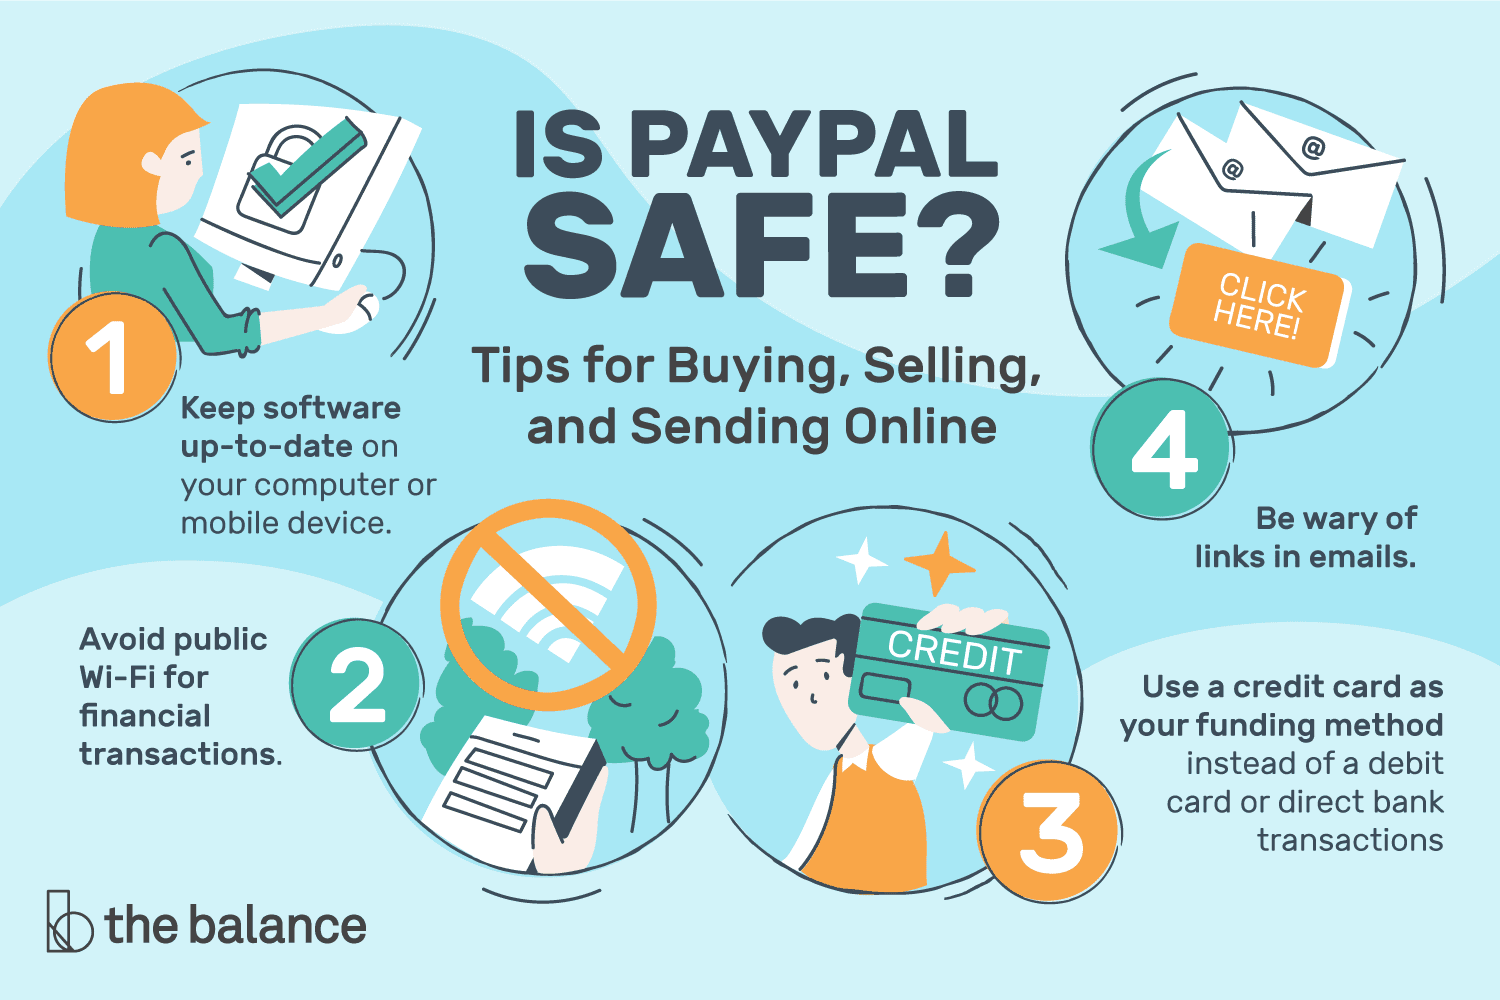 PayPal Verified Seller Logo - Is PayPal Safe? Tips for Buying, Selling, and Sending Online